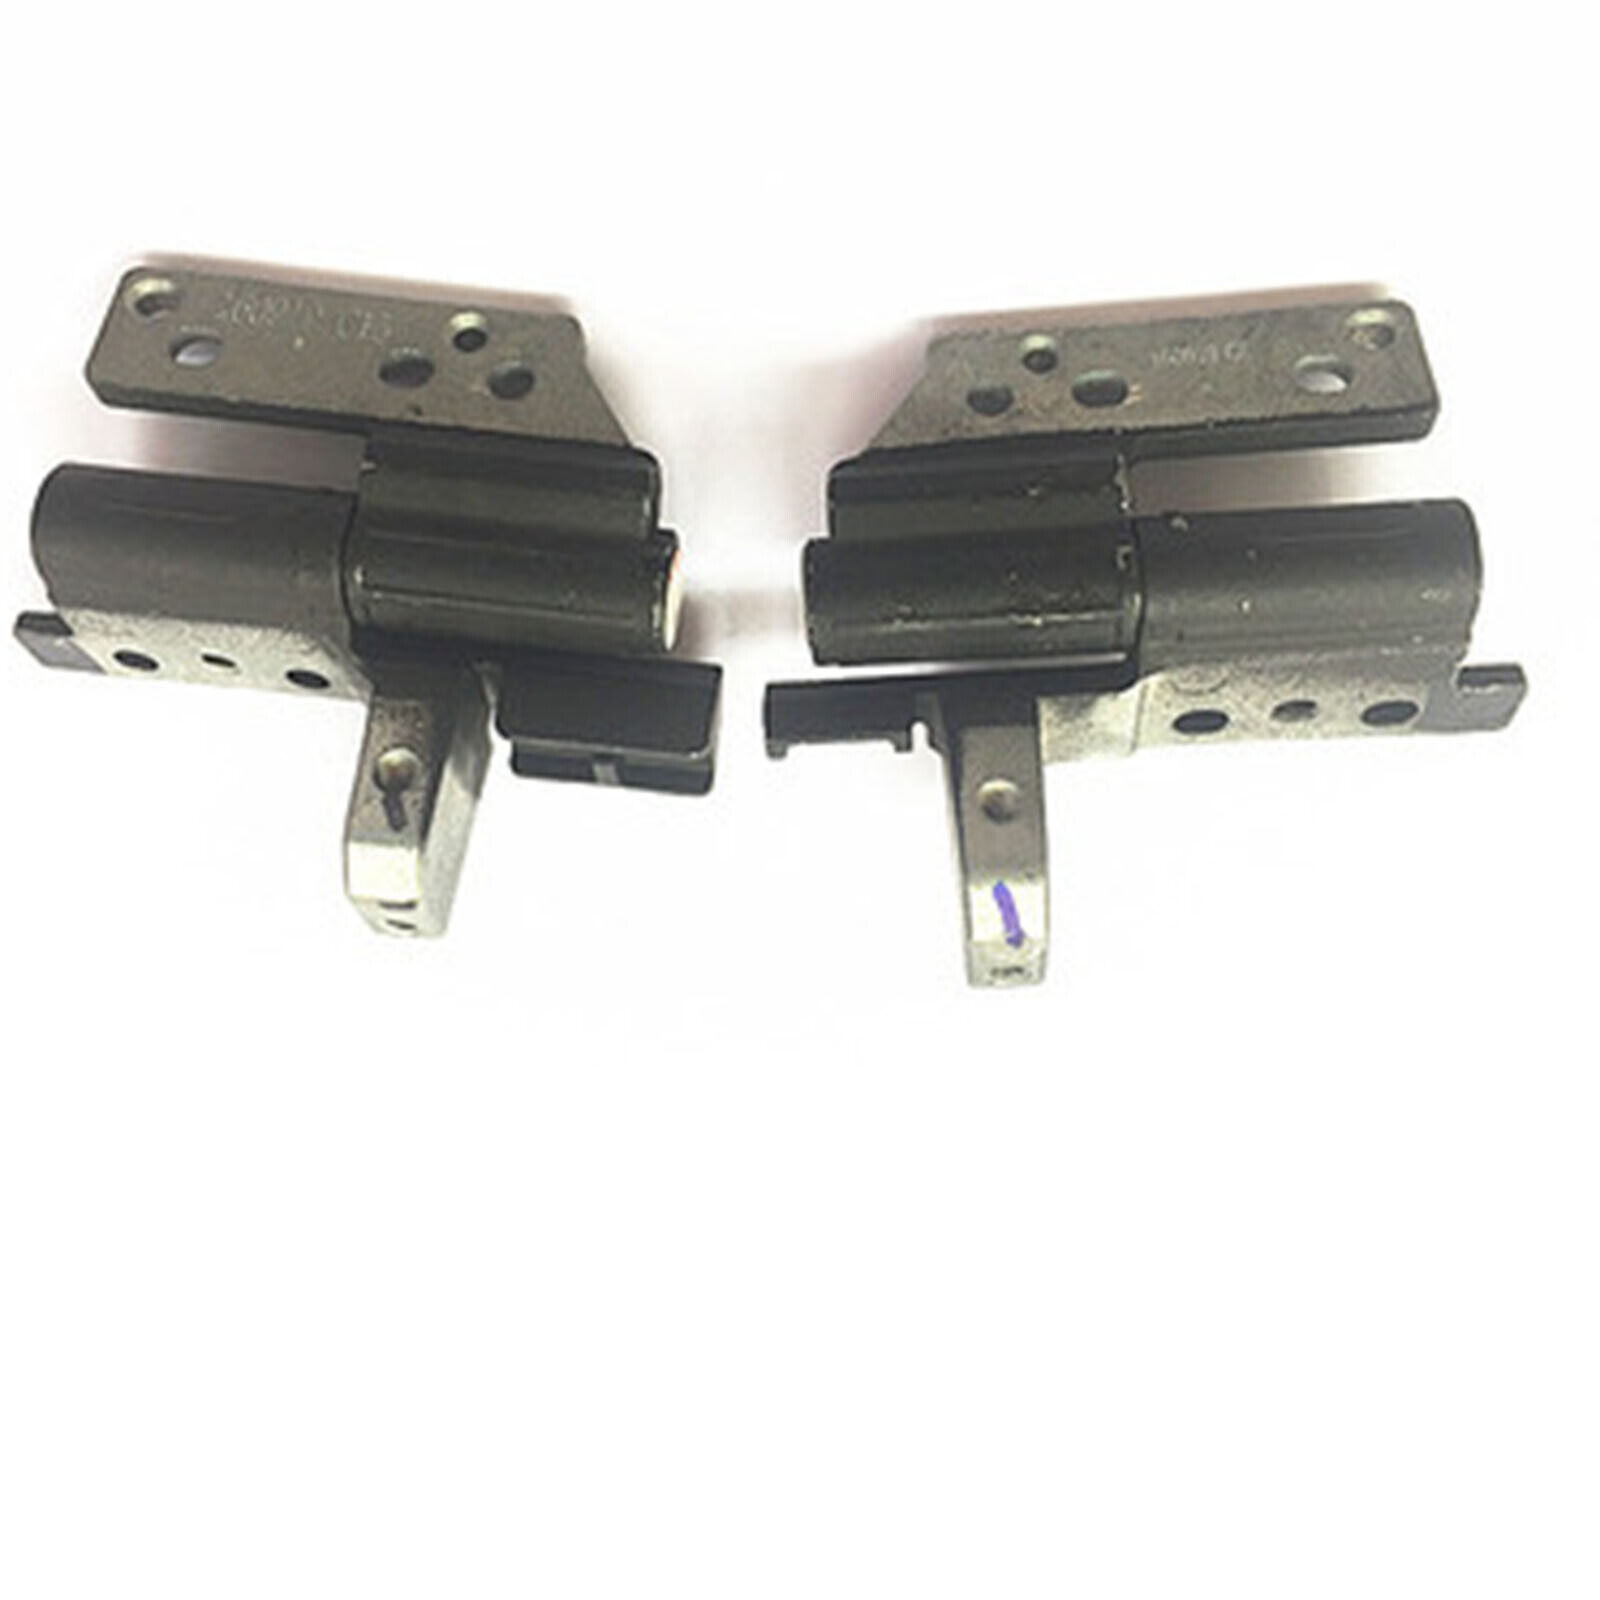 2Pcs Laptop LCD Hinge without Touch Screen Shaft For D Precision M6800 VAR10